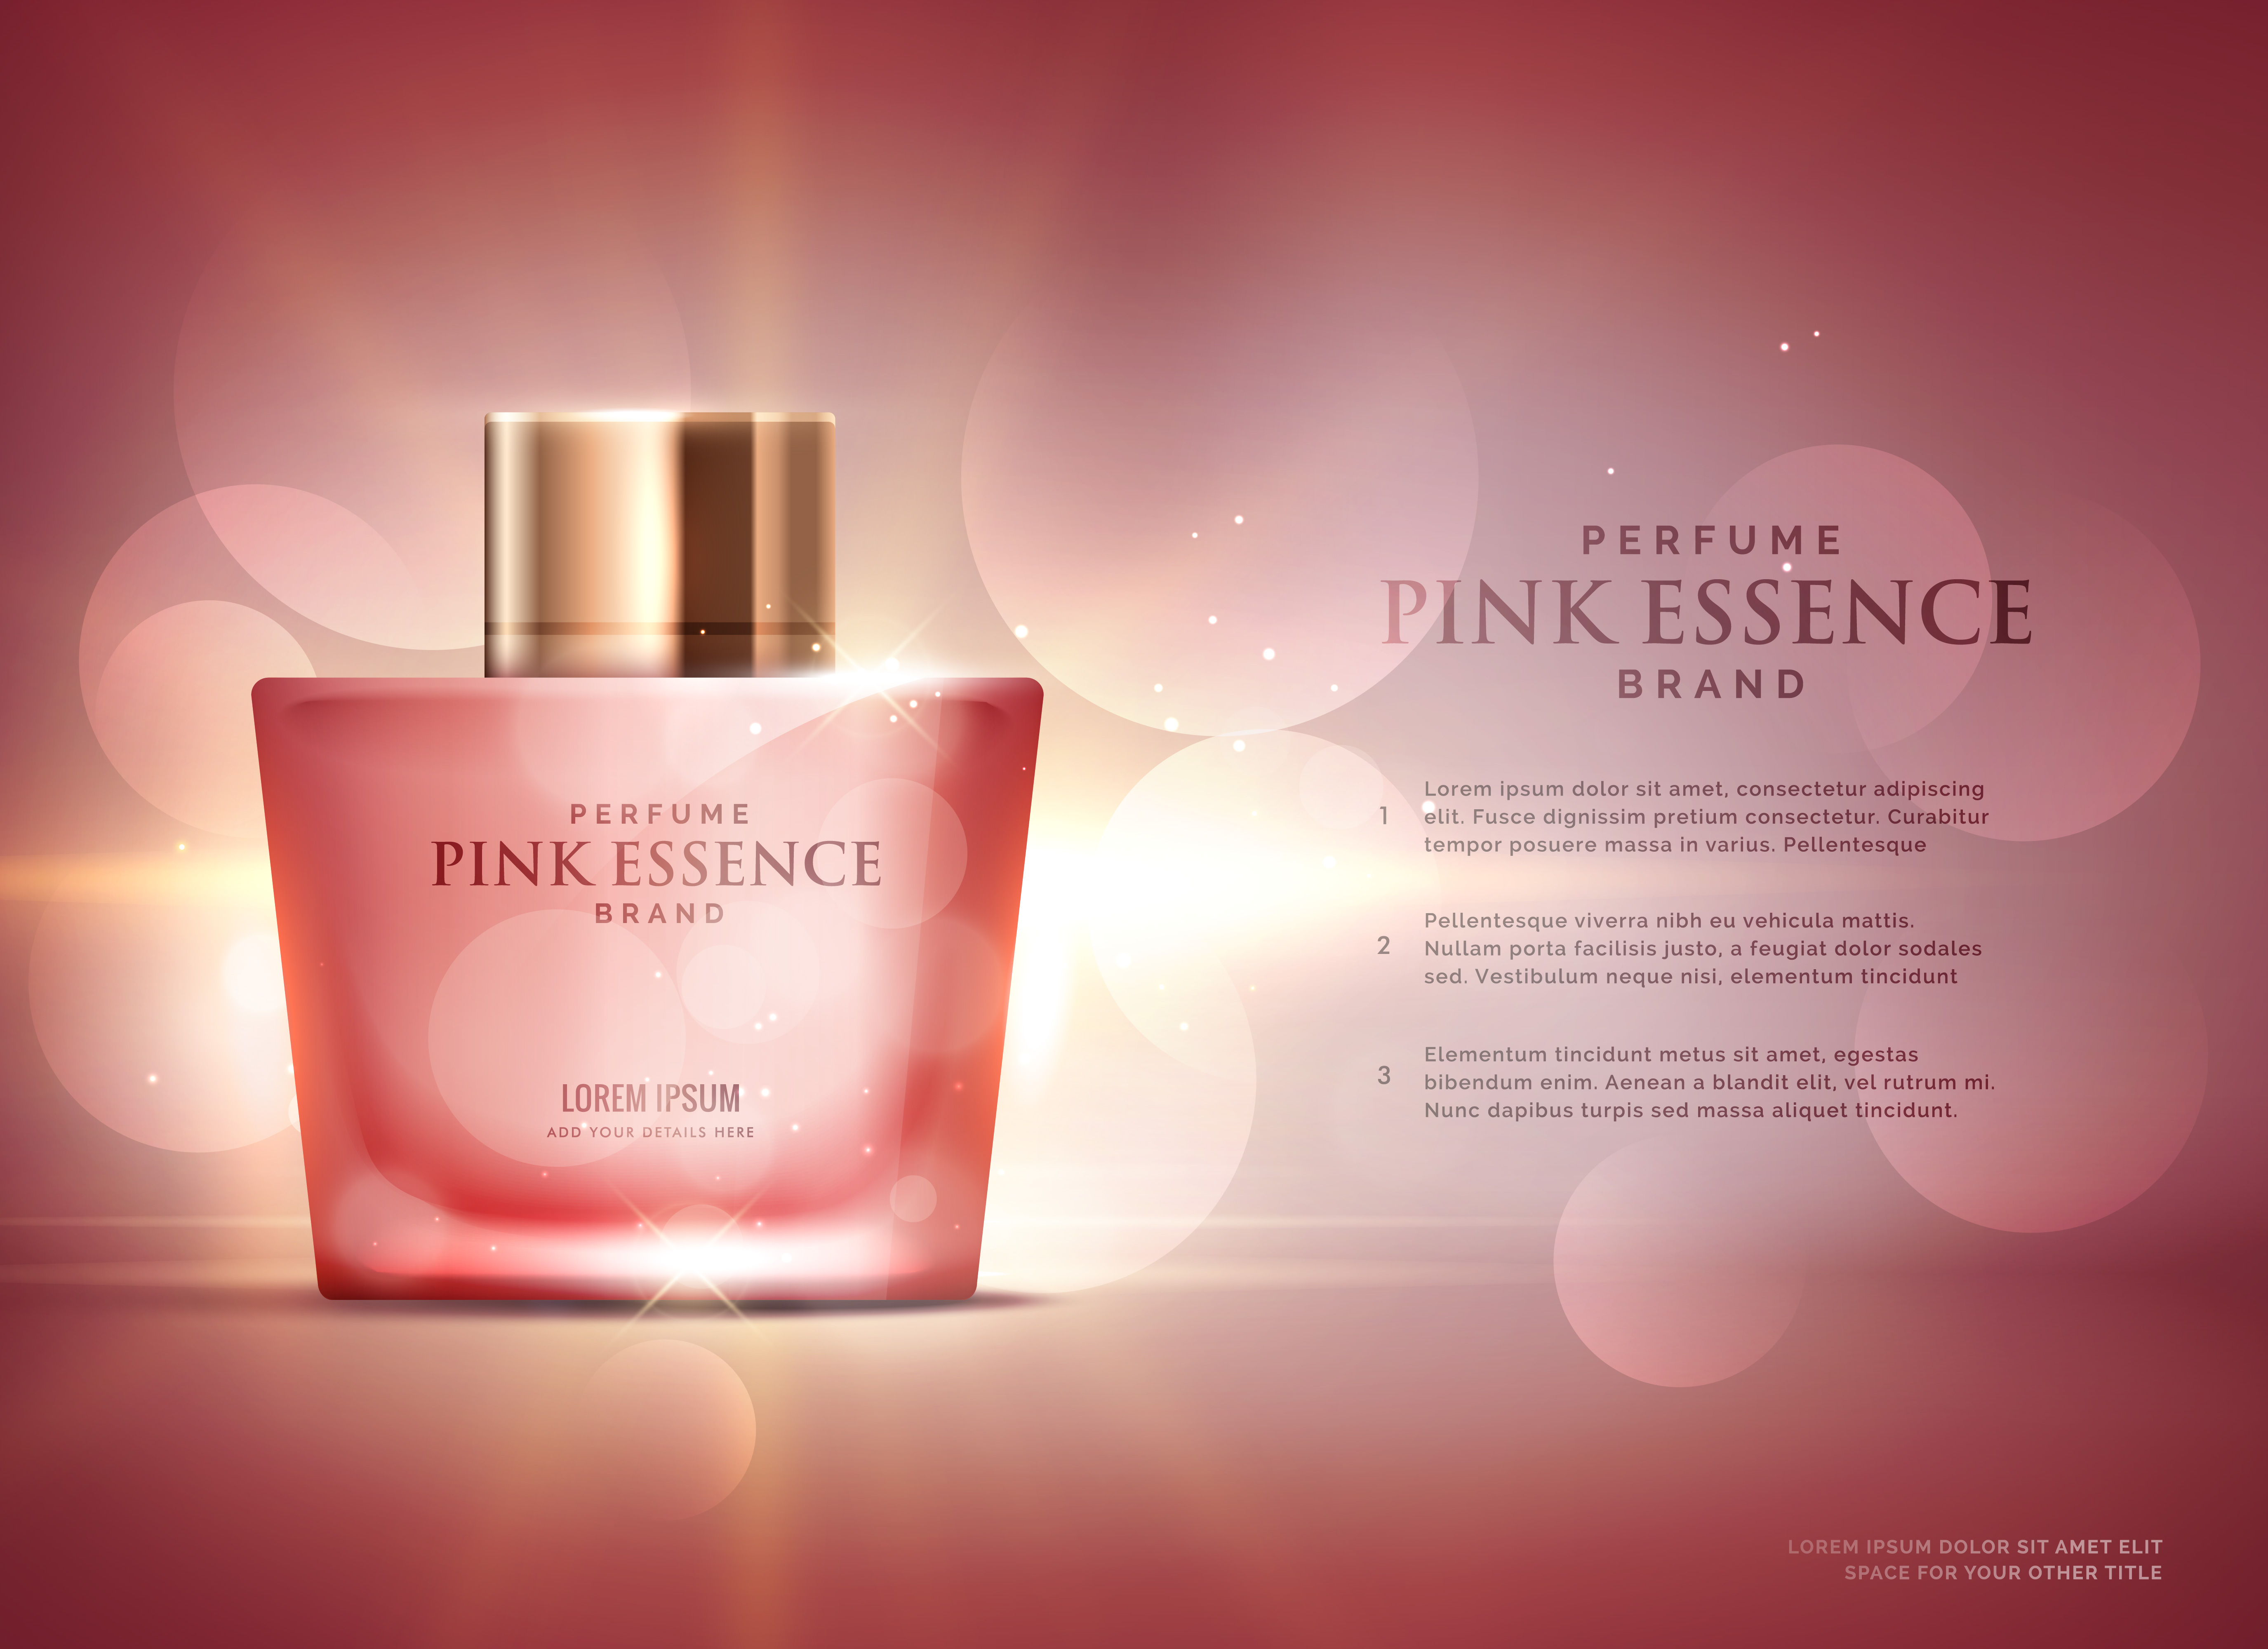 awesome perfume essence advertisement concept design ...